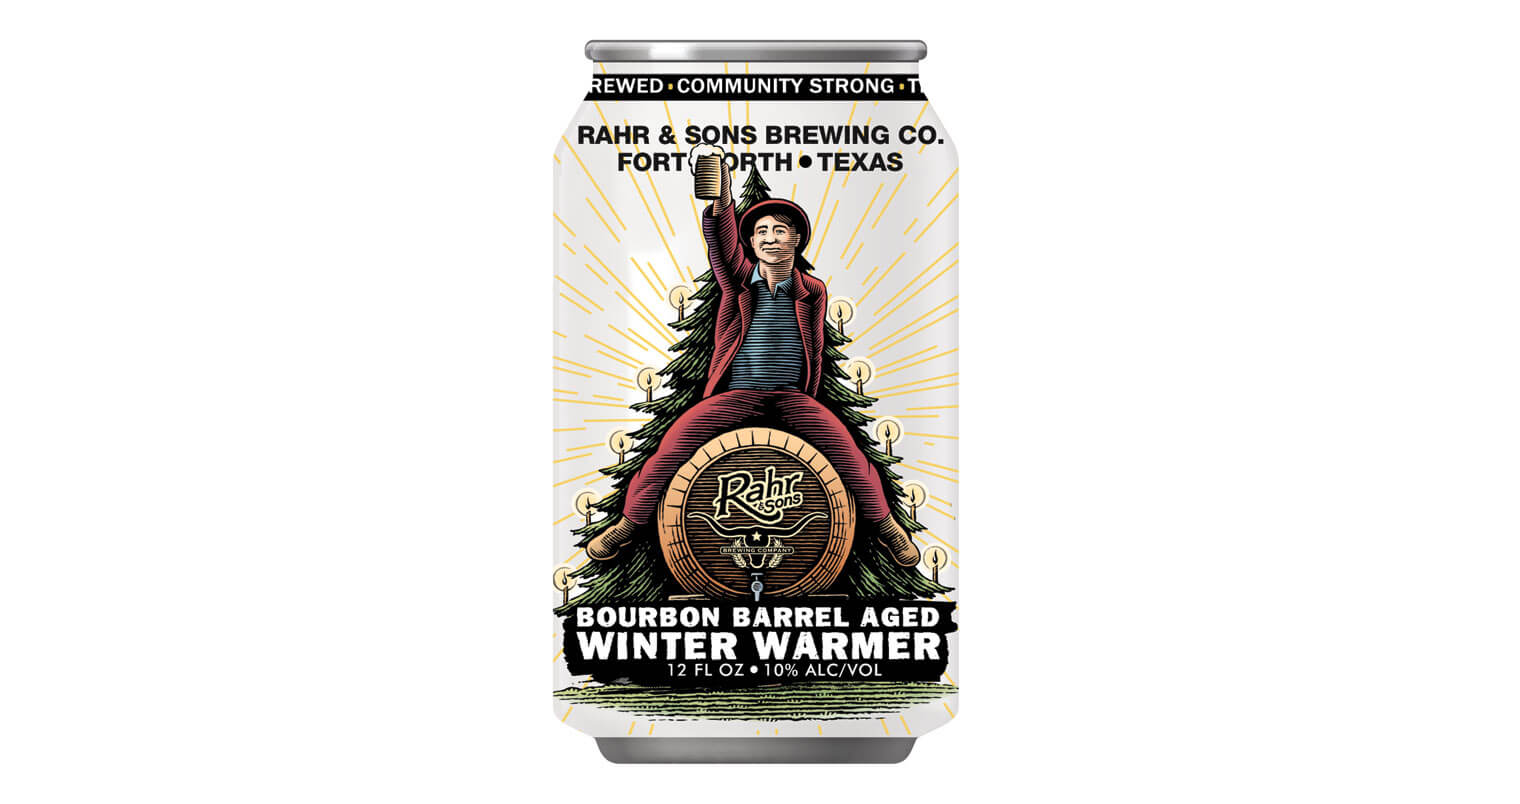 Rahr & Sons Brewing Co. Releases Bourbon Barrel Aged Winter Warmer Aged in Jack Daniel’s Barrels, featured image